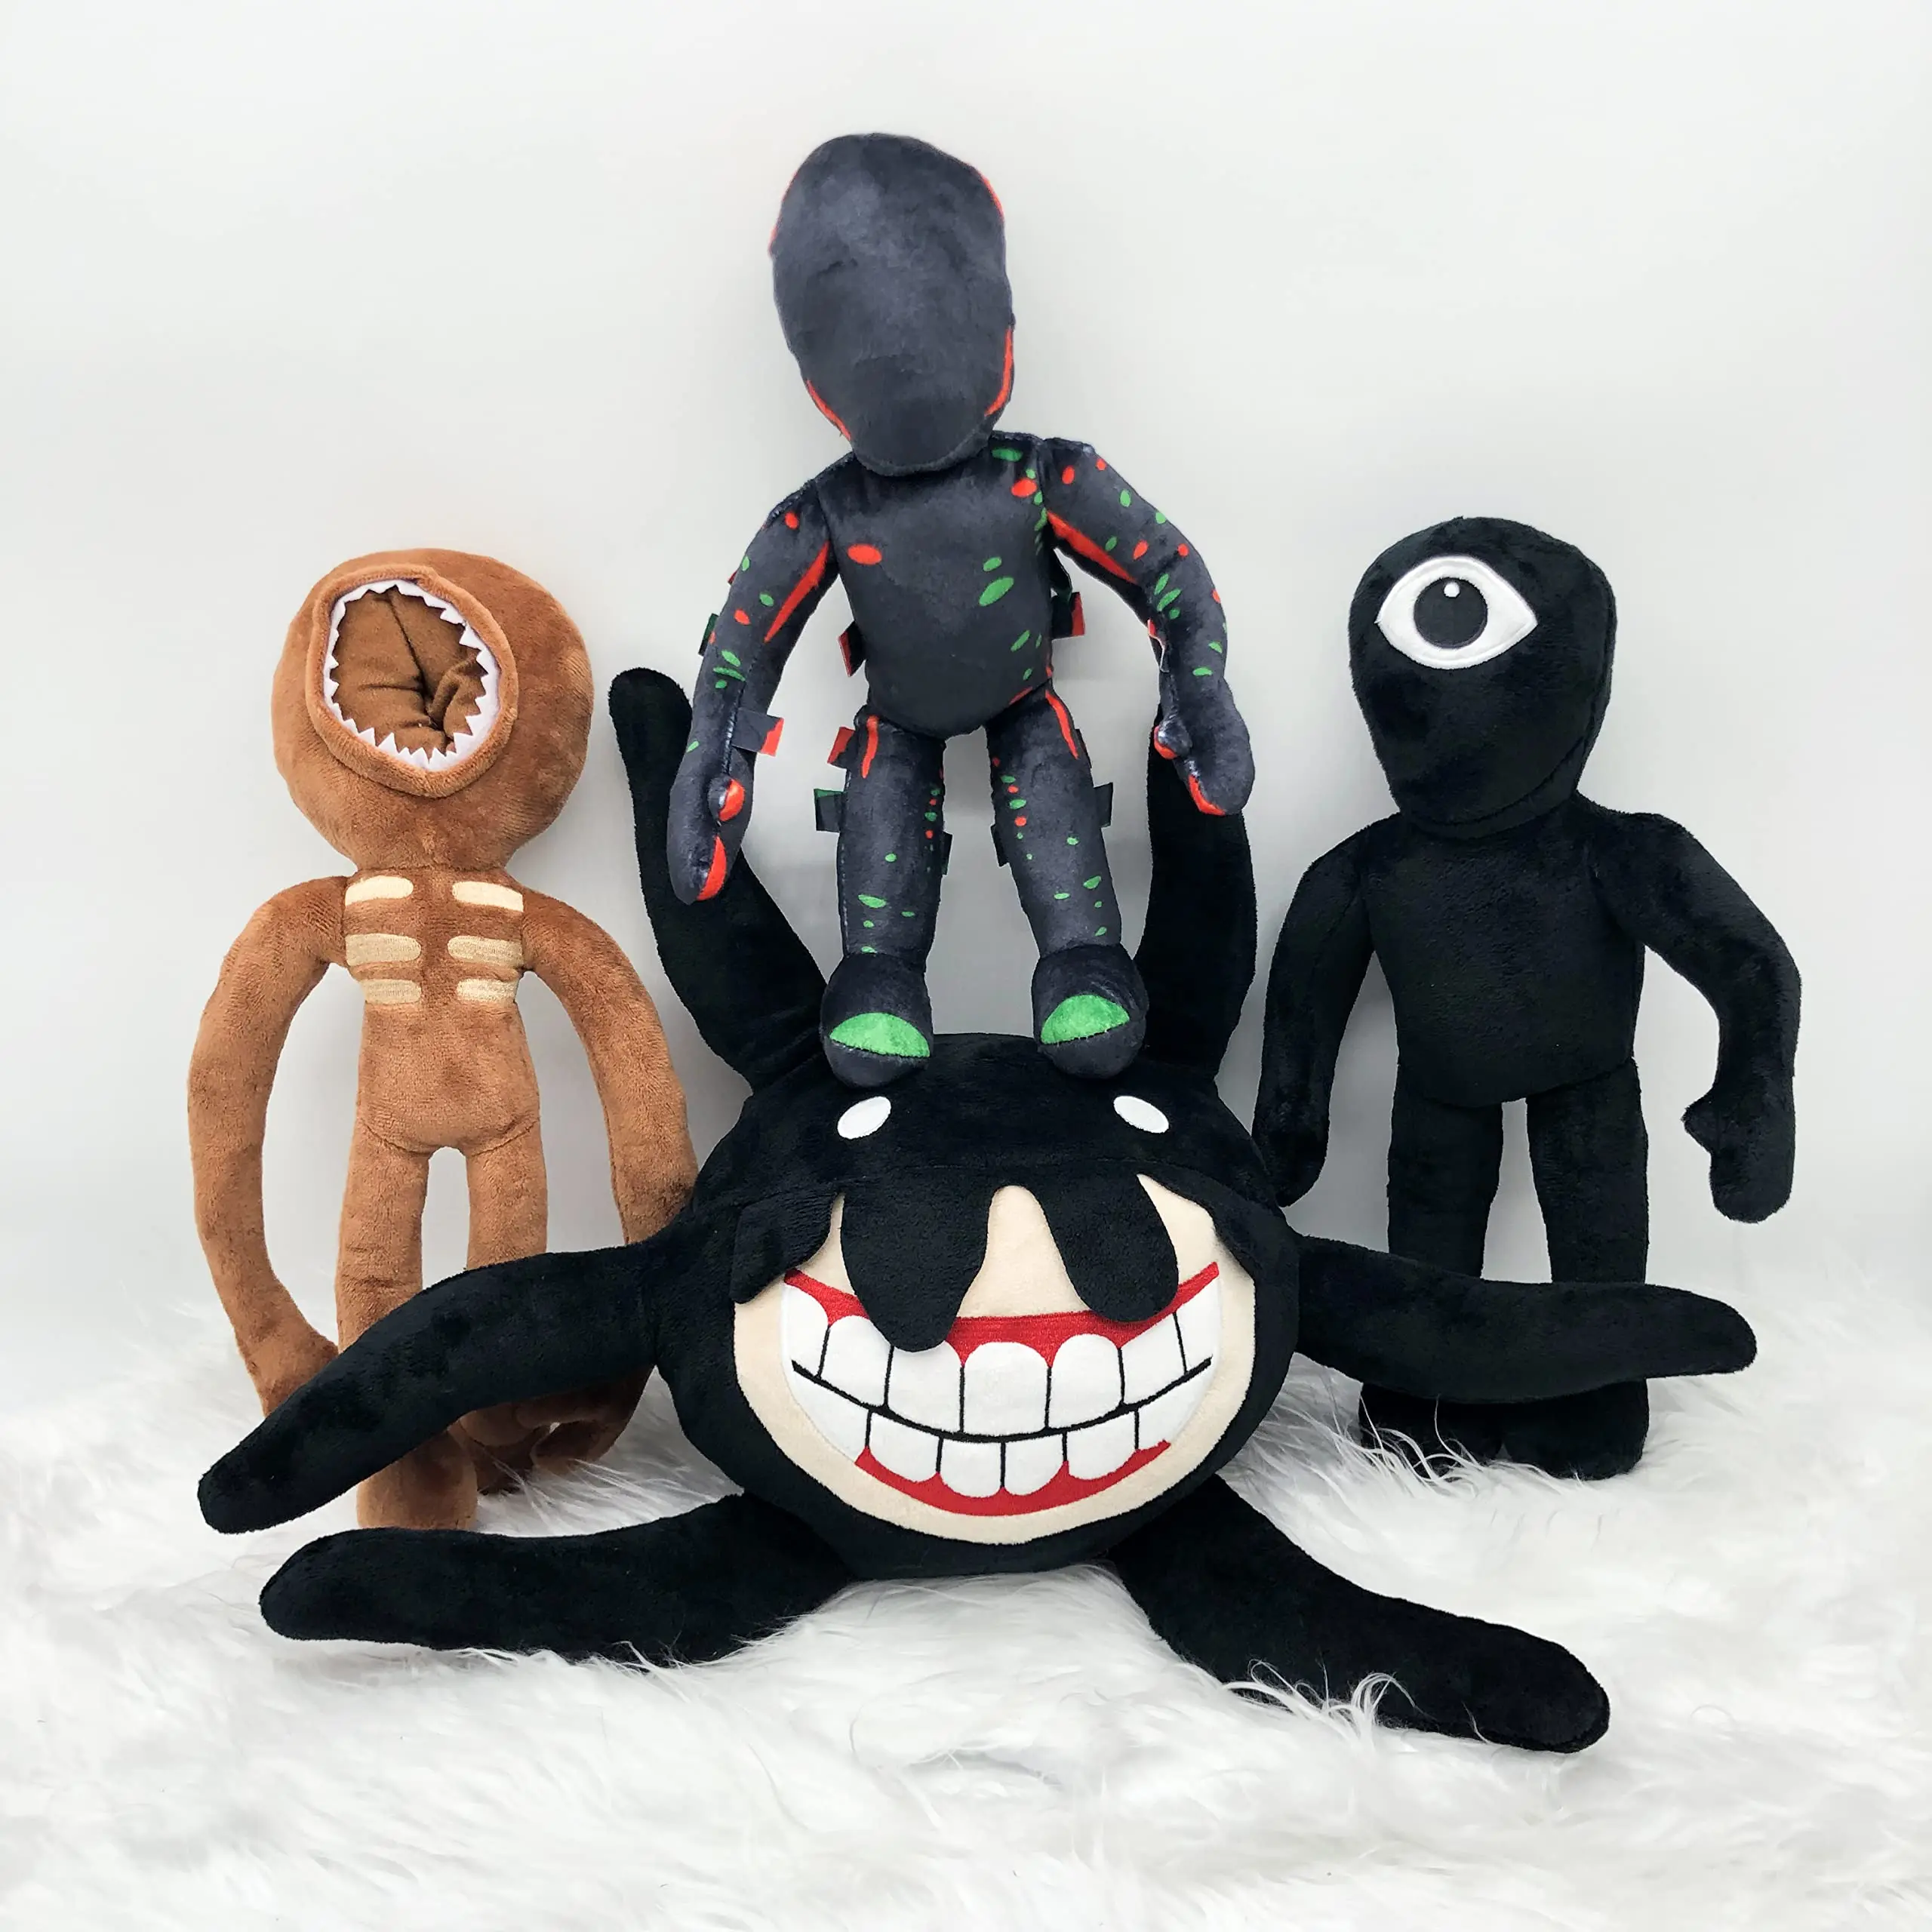 Doors Plush - 8 Ambush Plushies Toy for Fans Gift, 2022 New Monster Horror  Game Stuffed Figure Doll for Kids and Adults, Halloween Christmas Birthday